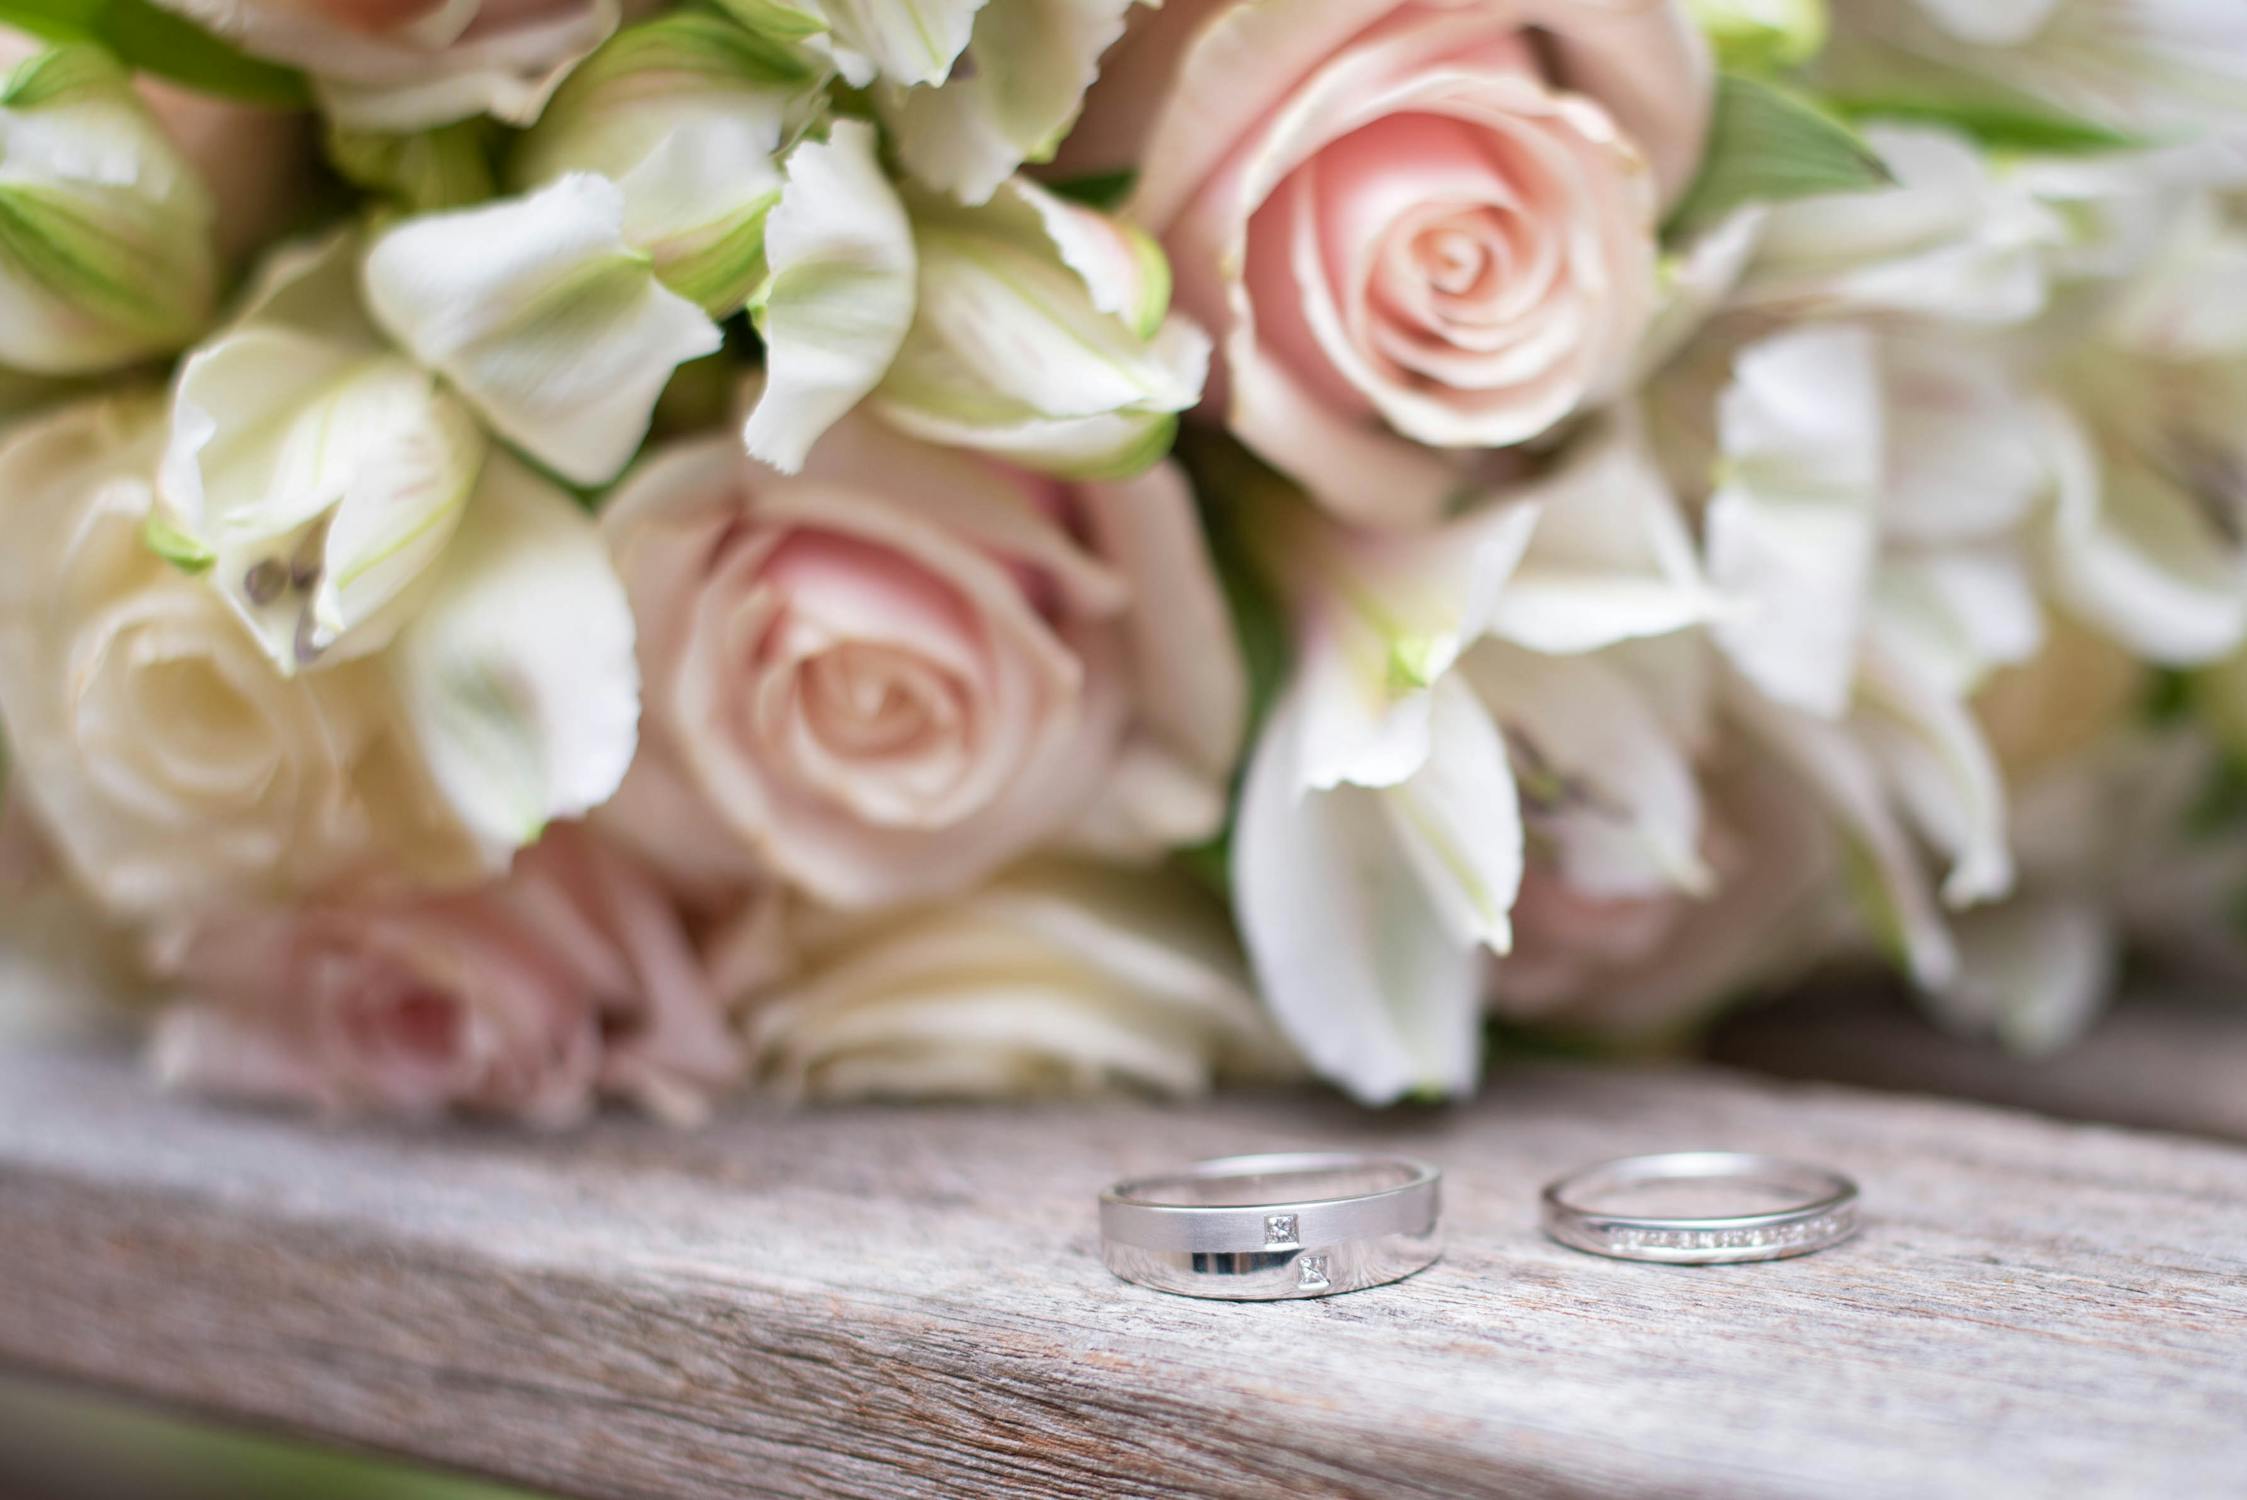 Bridal bouquets near silver rings on wooden surface · Free Stock Photo